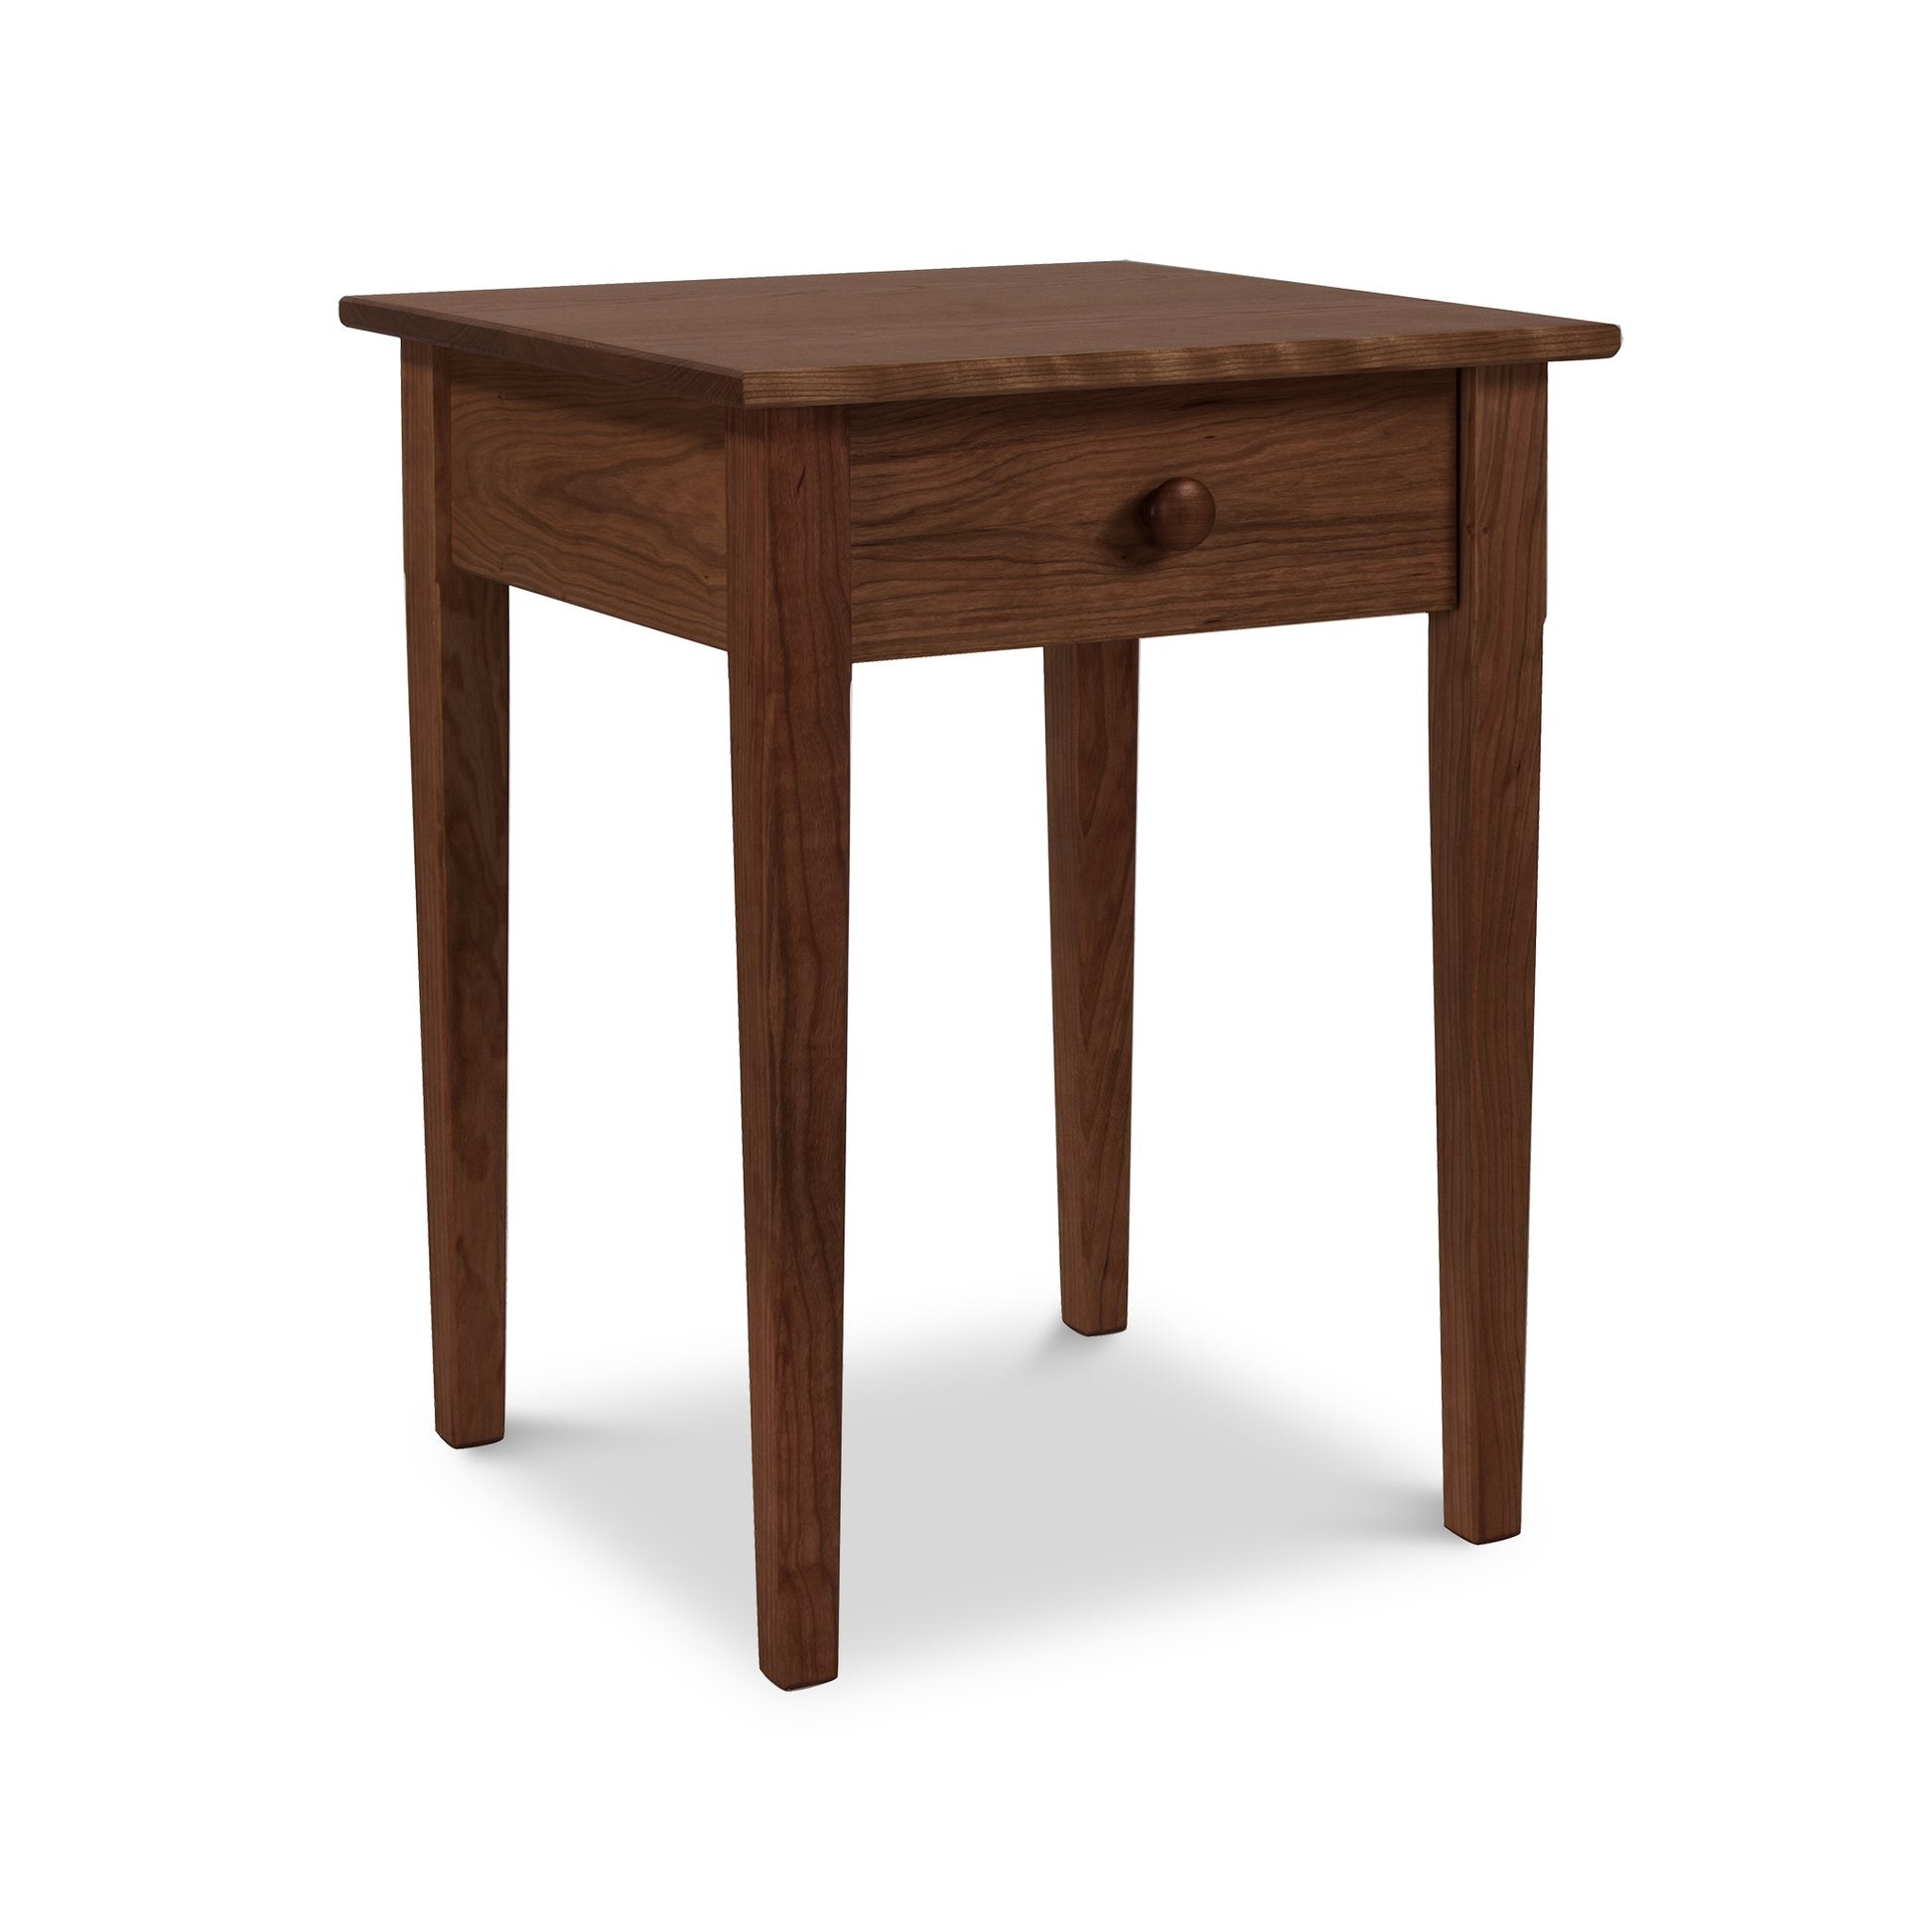 A Vermont Shaker Bedside Table, crafted from sustainably harvested solid woods by Maple Corner Woodworks, featuring a single drawer, stands against a plain white background. The table boasts a smooth top and slightly tapered legs.